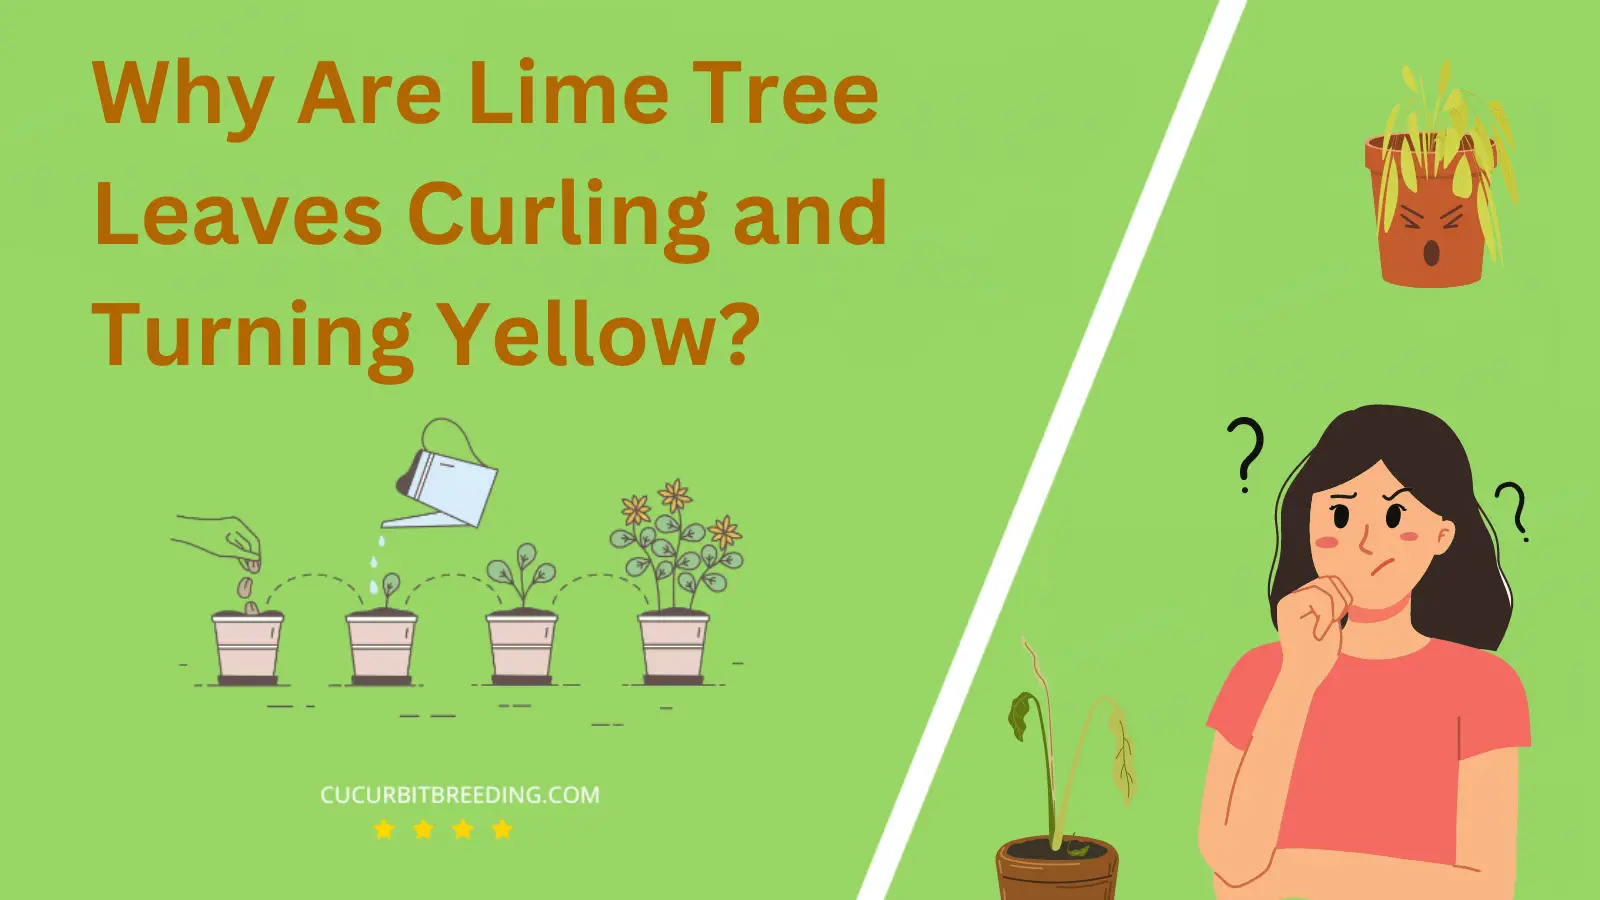 Why Are Lime Tree Leaves Curling and Turning Yellow